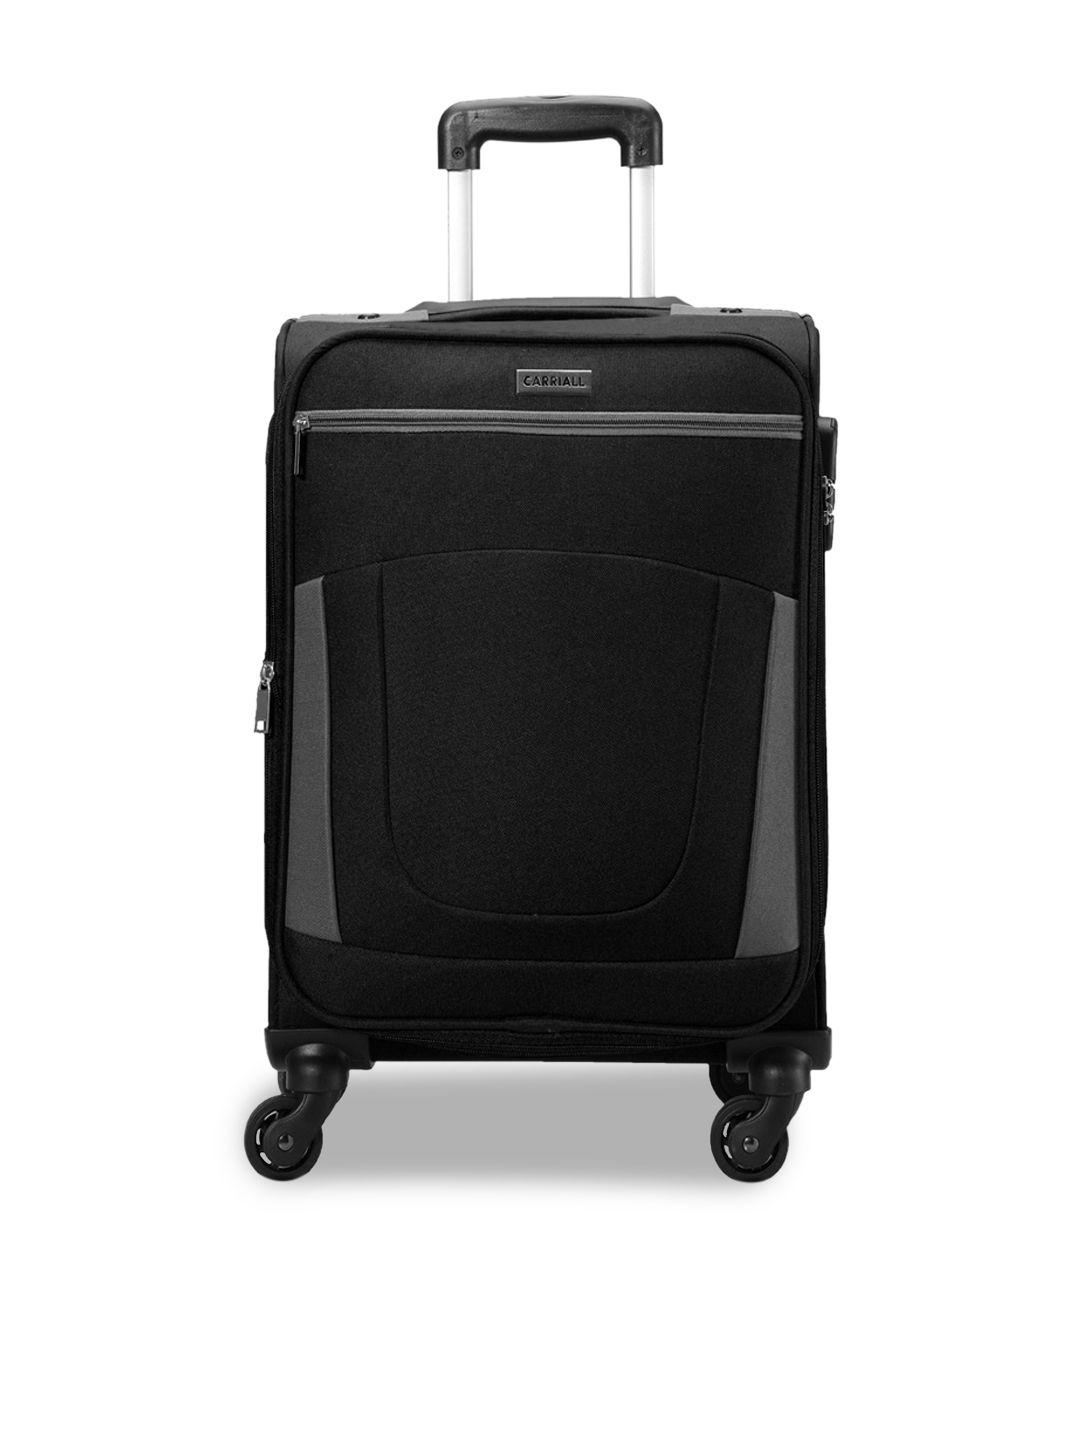 carriall black & grey solid soft-sided trolley suitcase